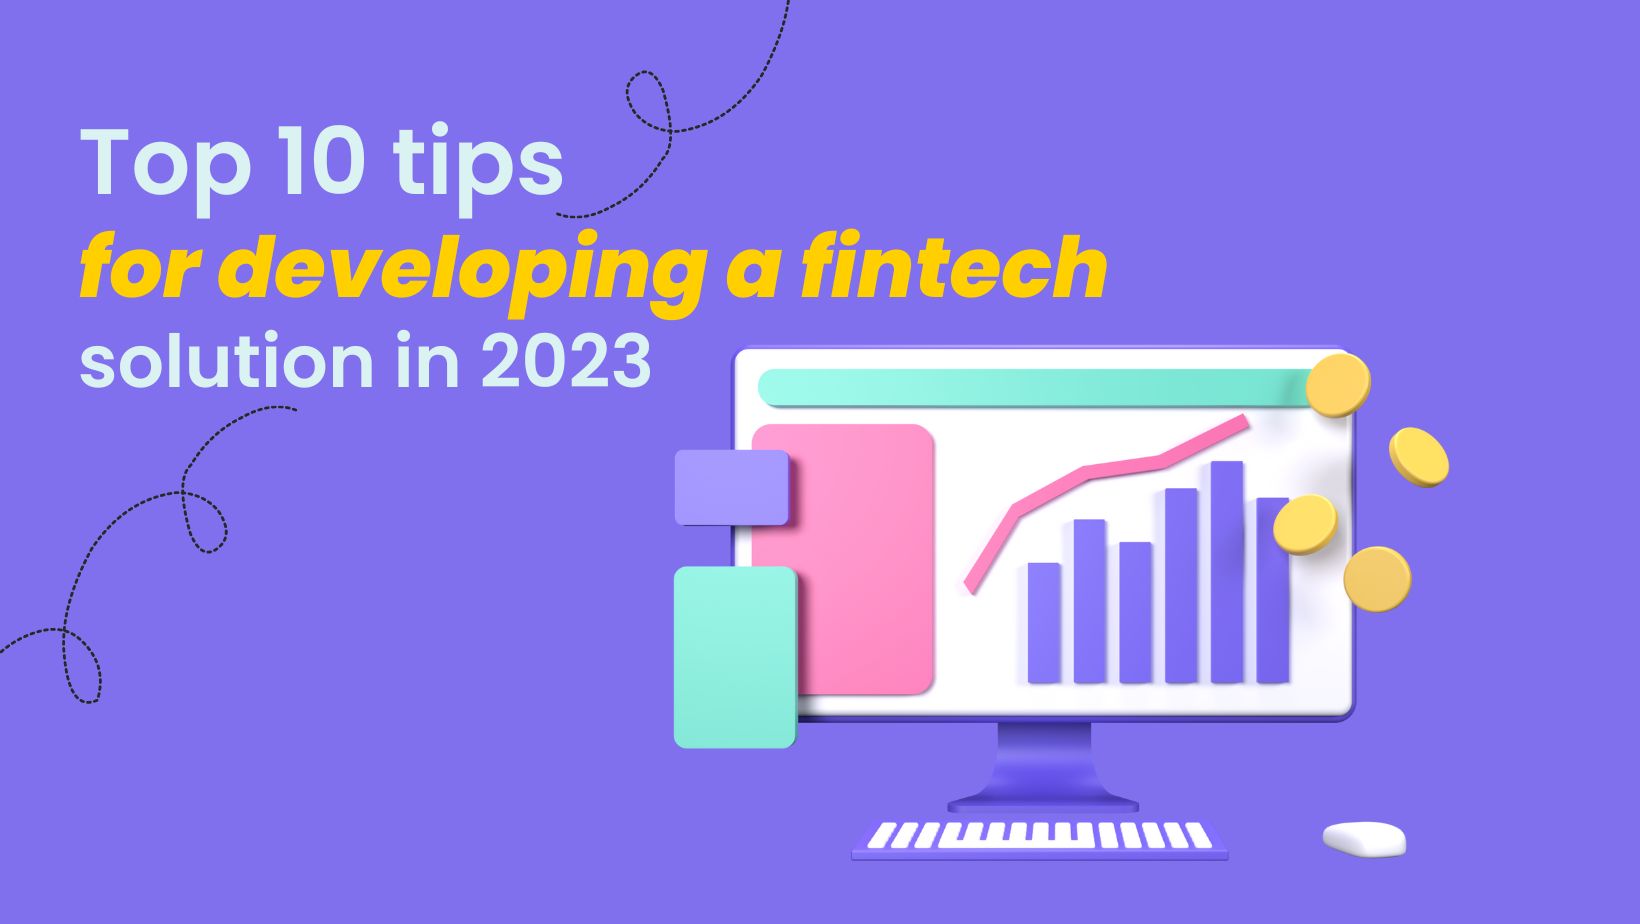 Tips For Developing a Fintech Solution